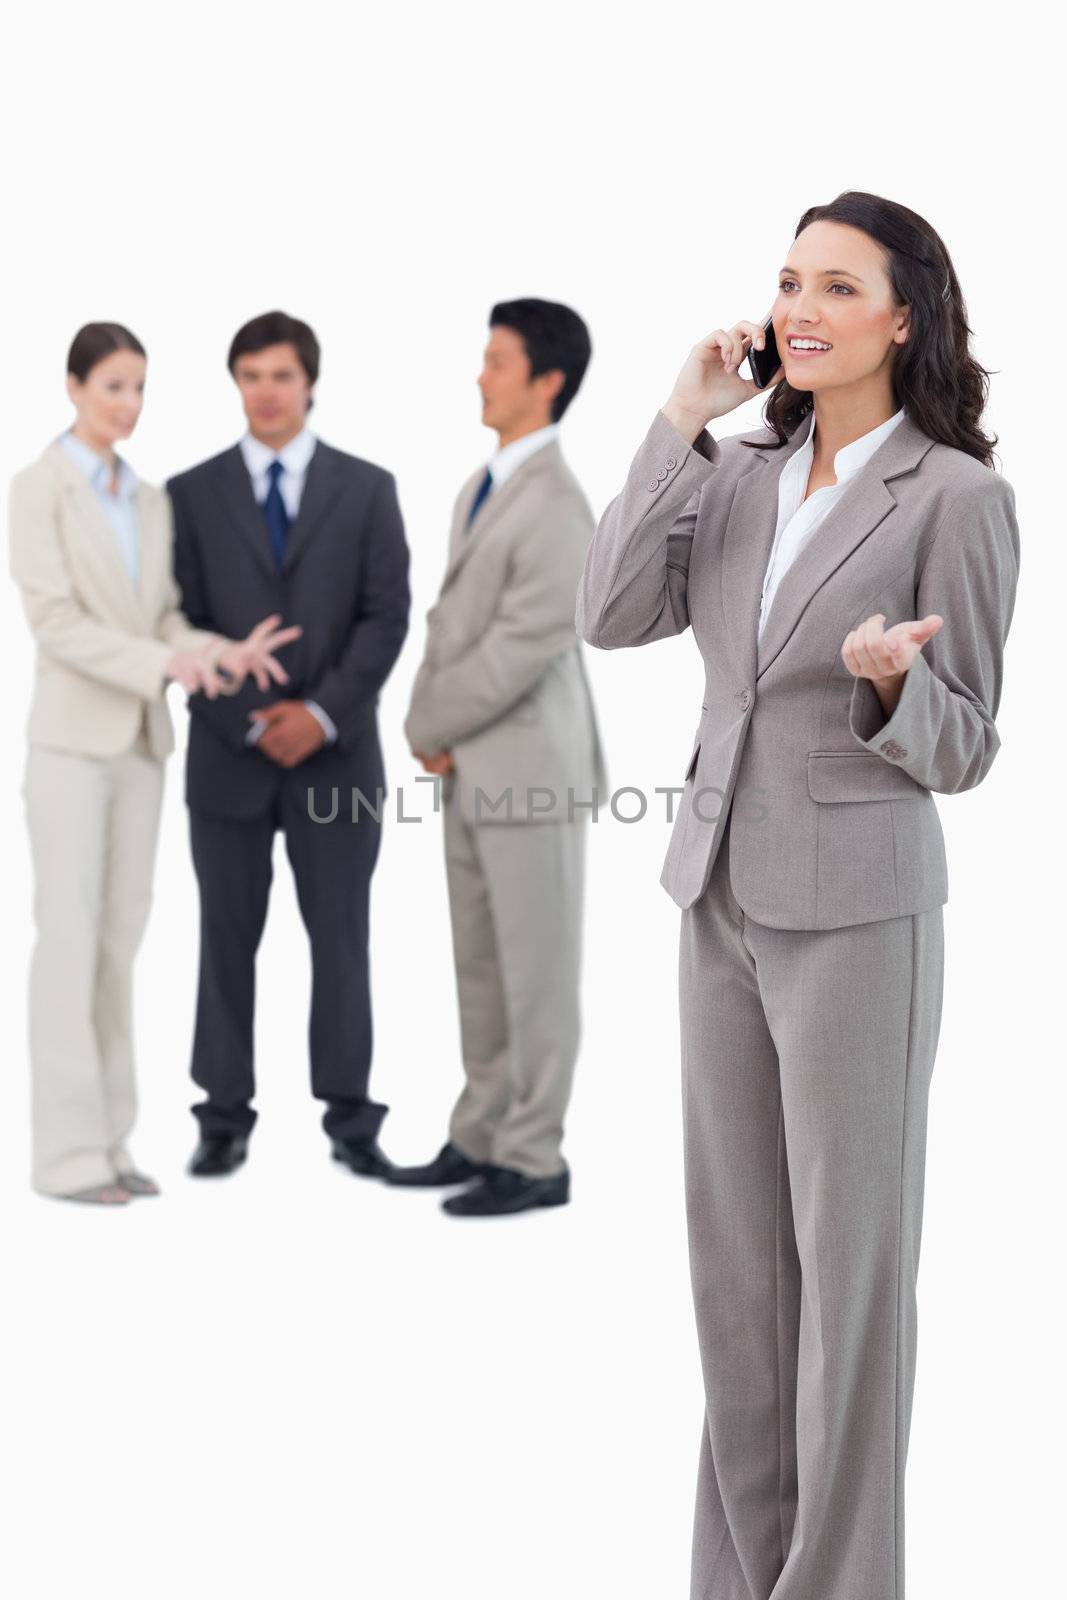 Saleswoman talking on cellphone with colleagues behind her against a white background